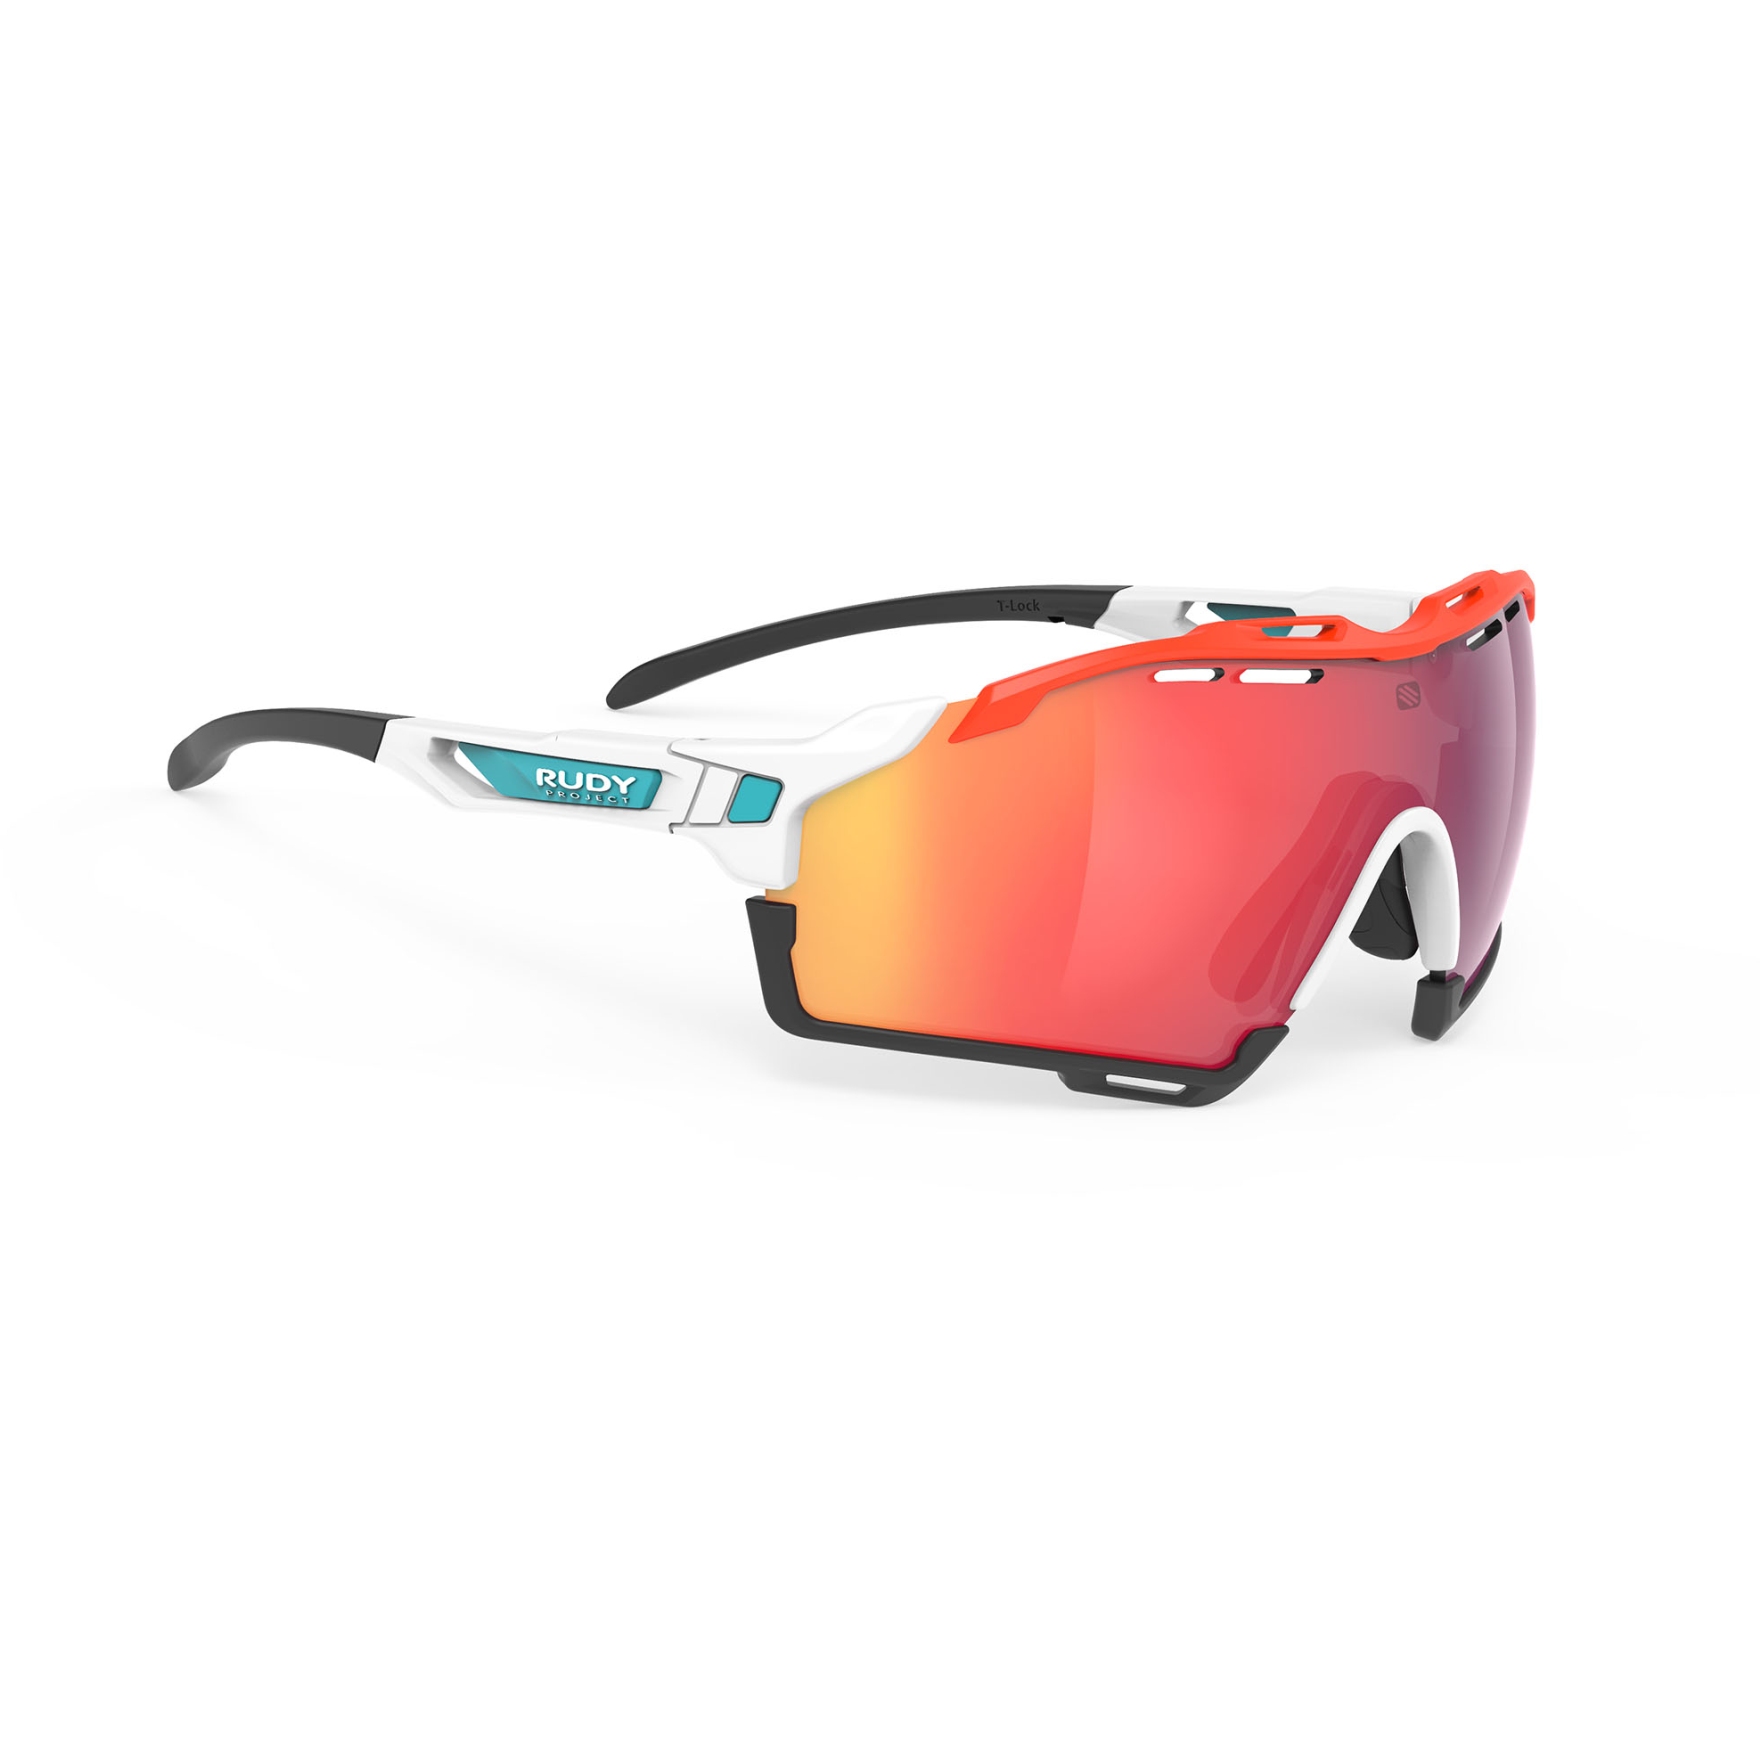 Productfoto van Rudy Project Cutline Glasses - White (Matte) / Multilaser Red